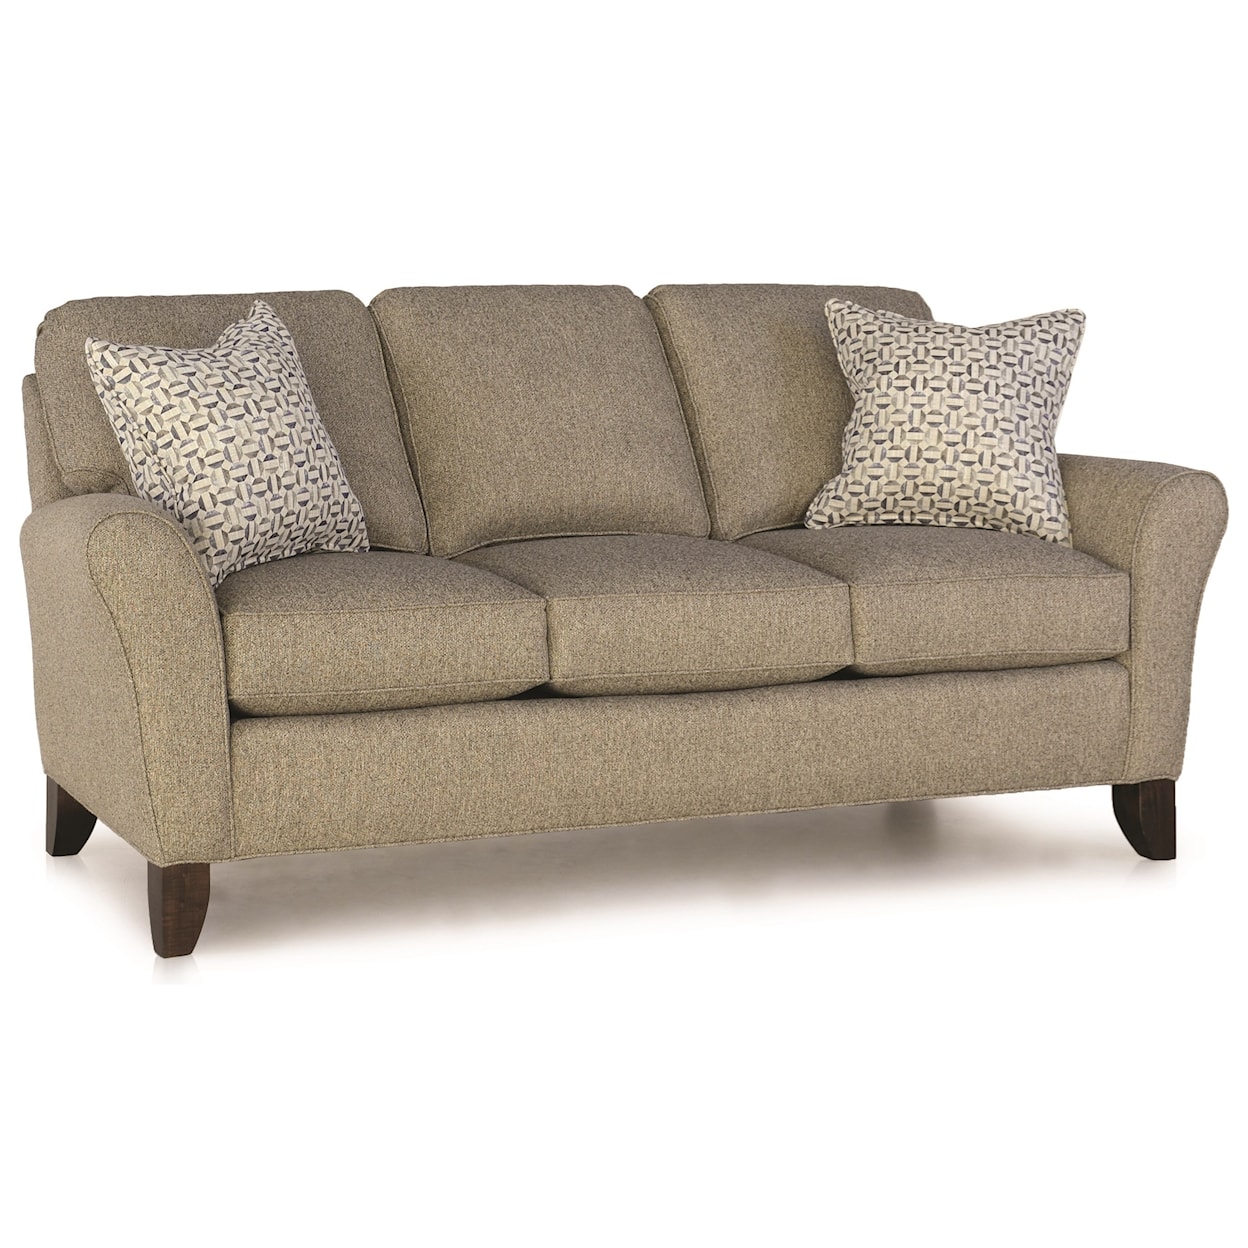 Smith Brothers 344 Upholstered Sofa